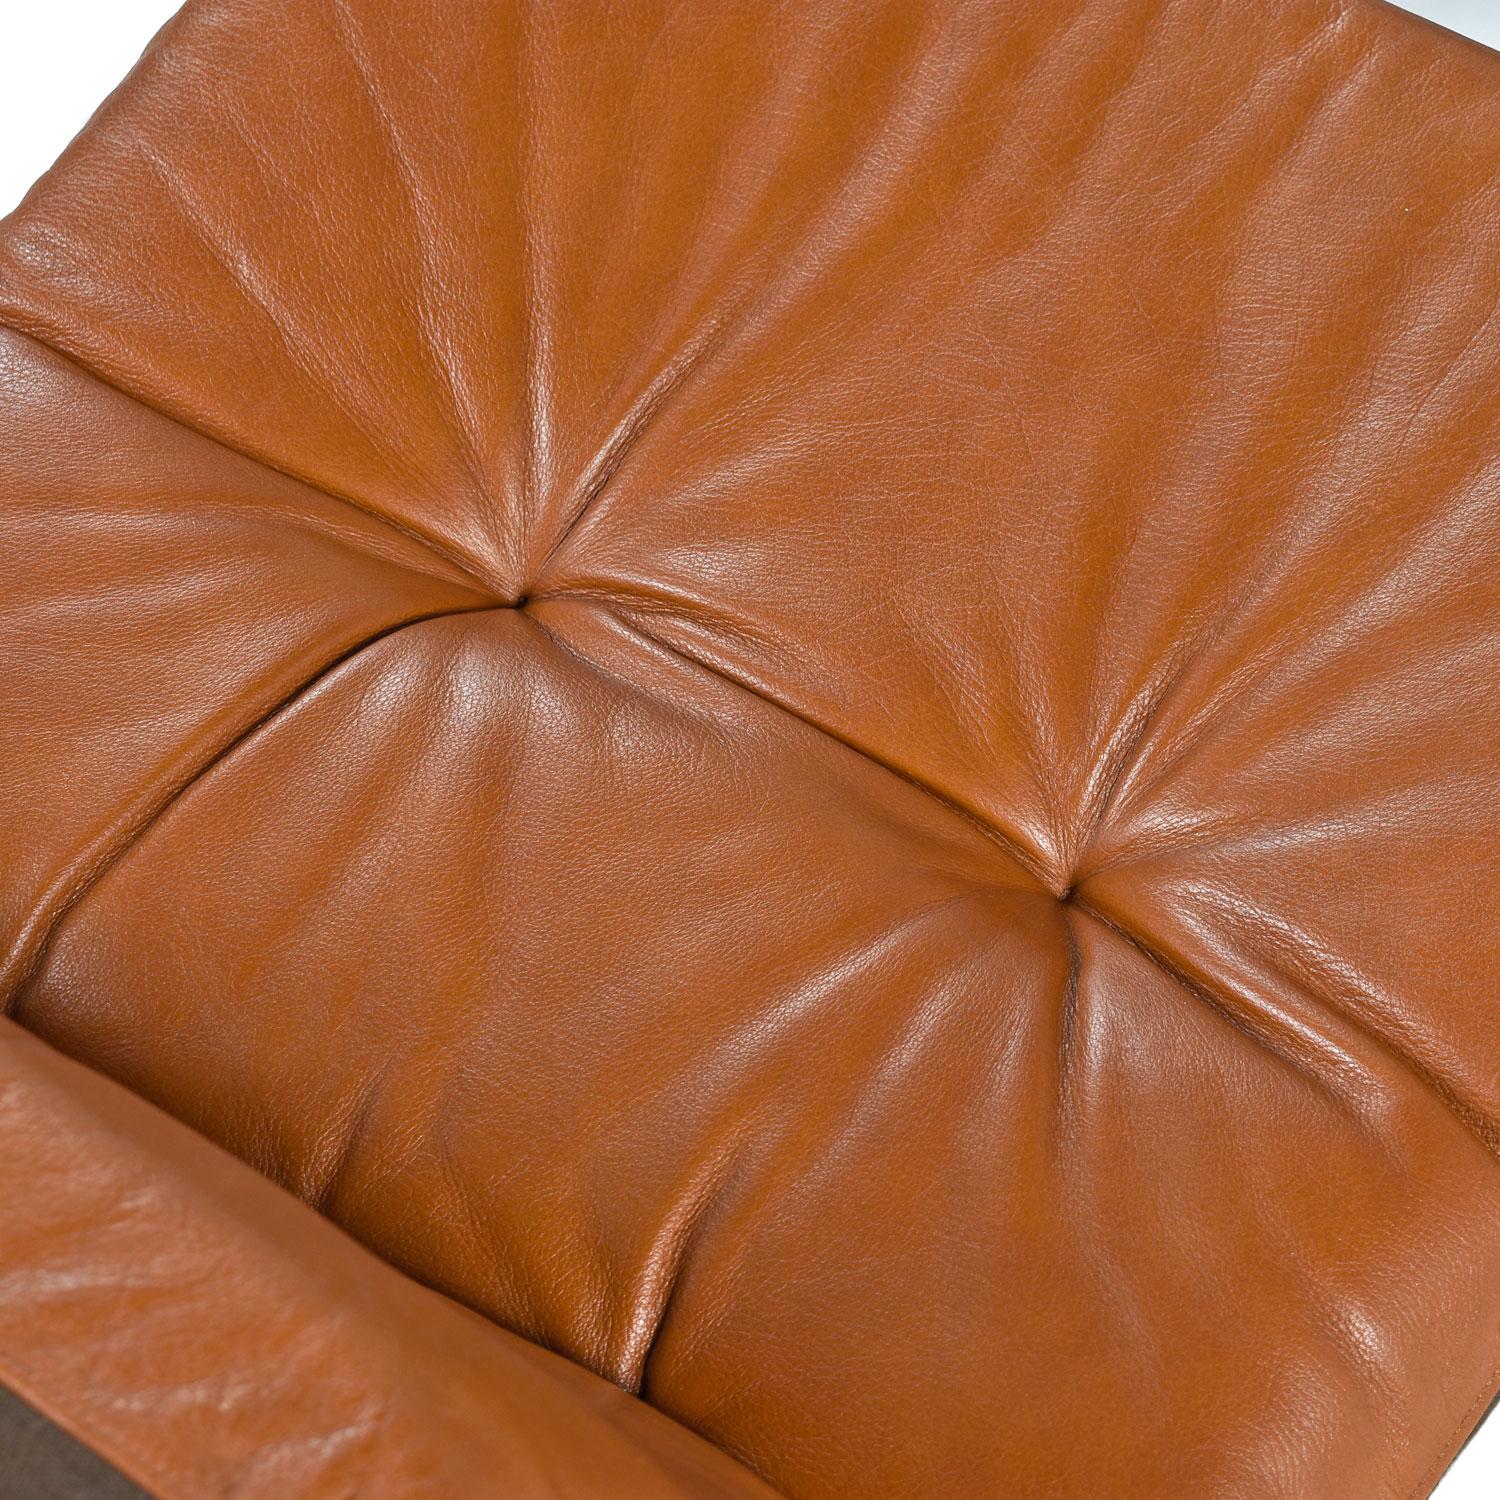 Late 20th Century Ake Fribytter for Nelo Cognac Leather Rosewood Kroken Lounge Chair and Ottoman